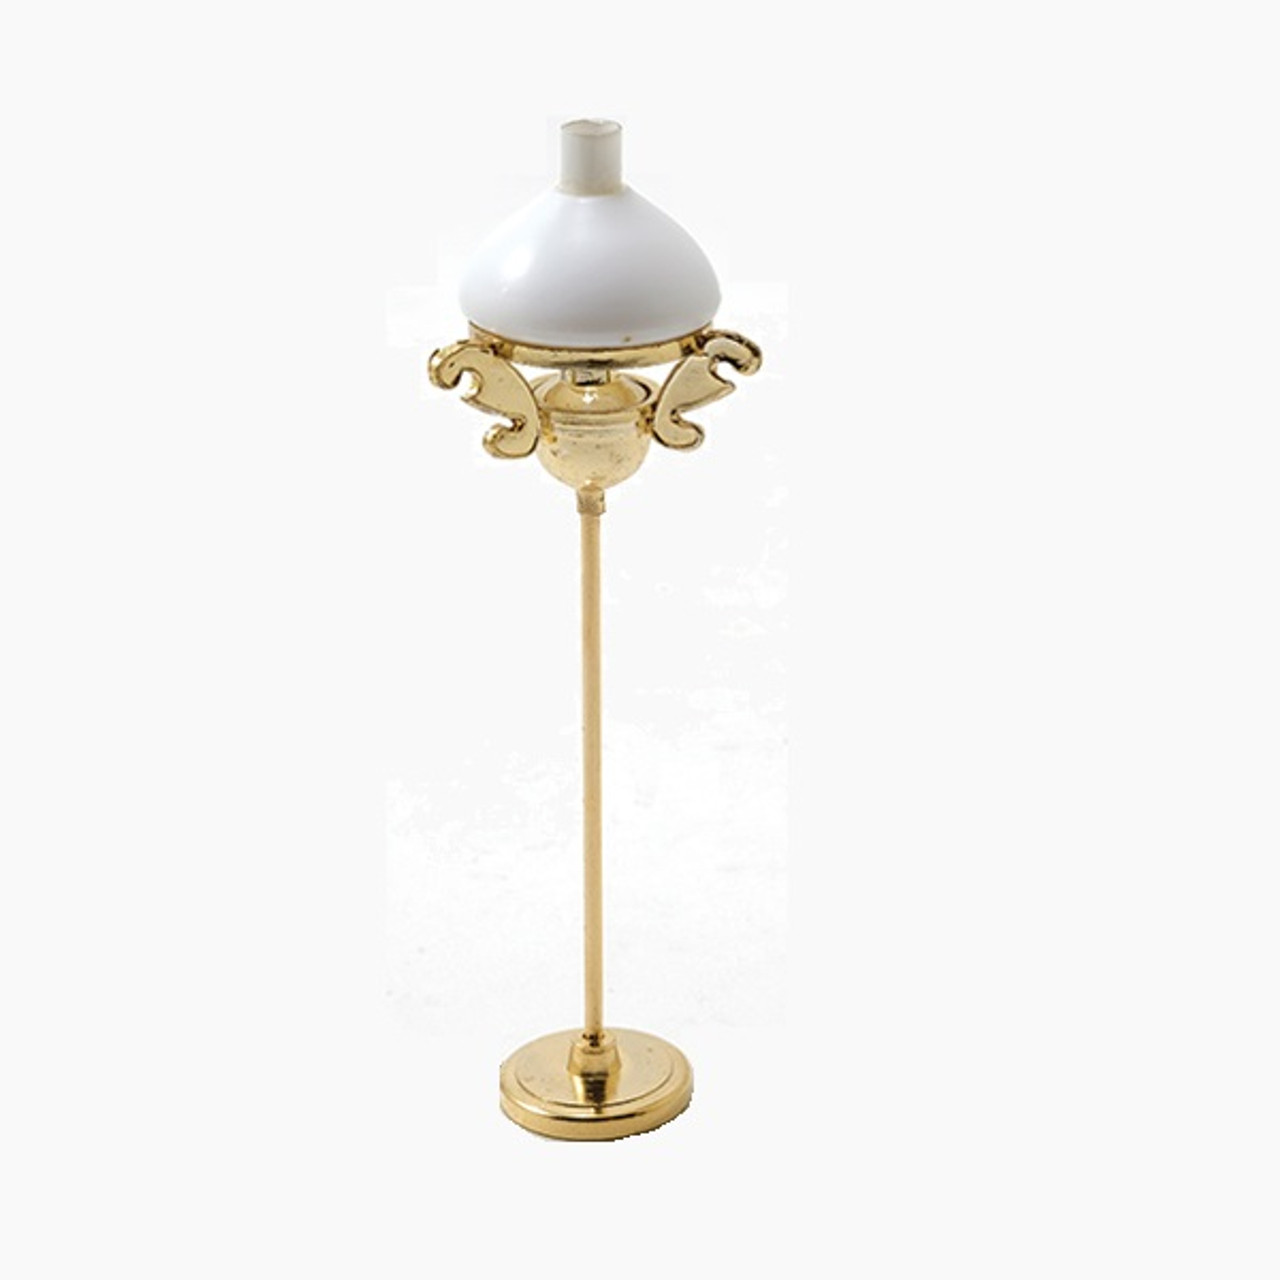 One-inch (1:12) Scale Dollhouse Miniature Victorian Floor Lamp, Gold (MH647)